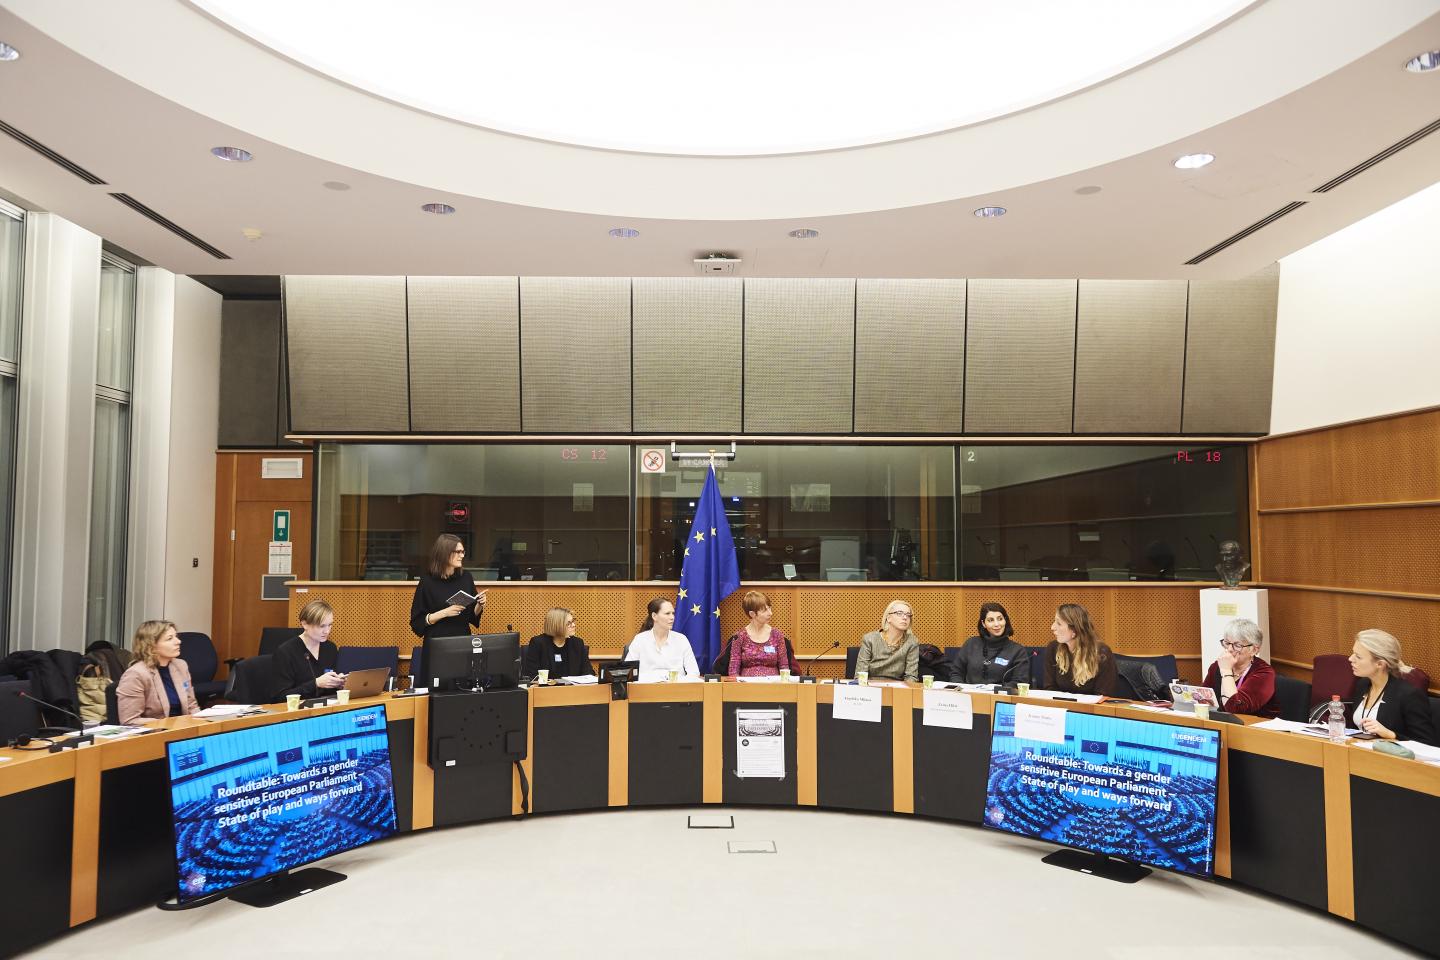 Study Questions European Parliament's Perception as Champion of Gender Equality